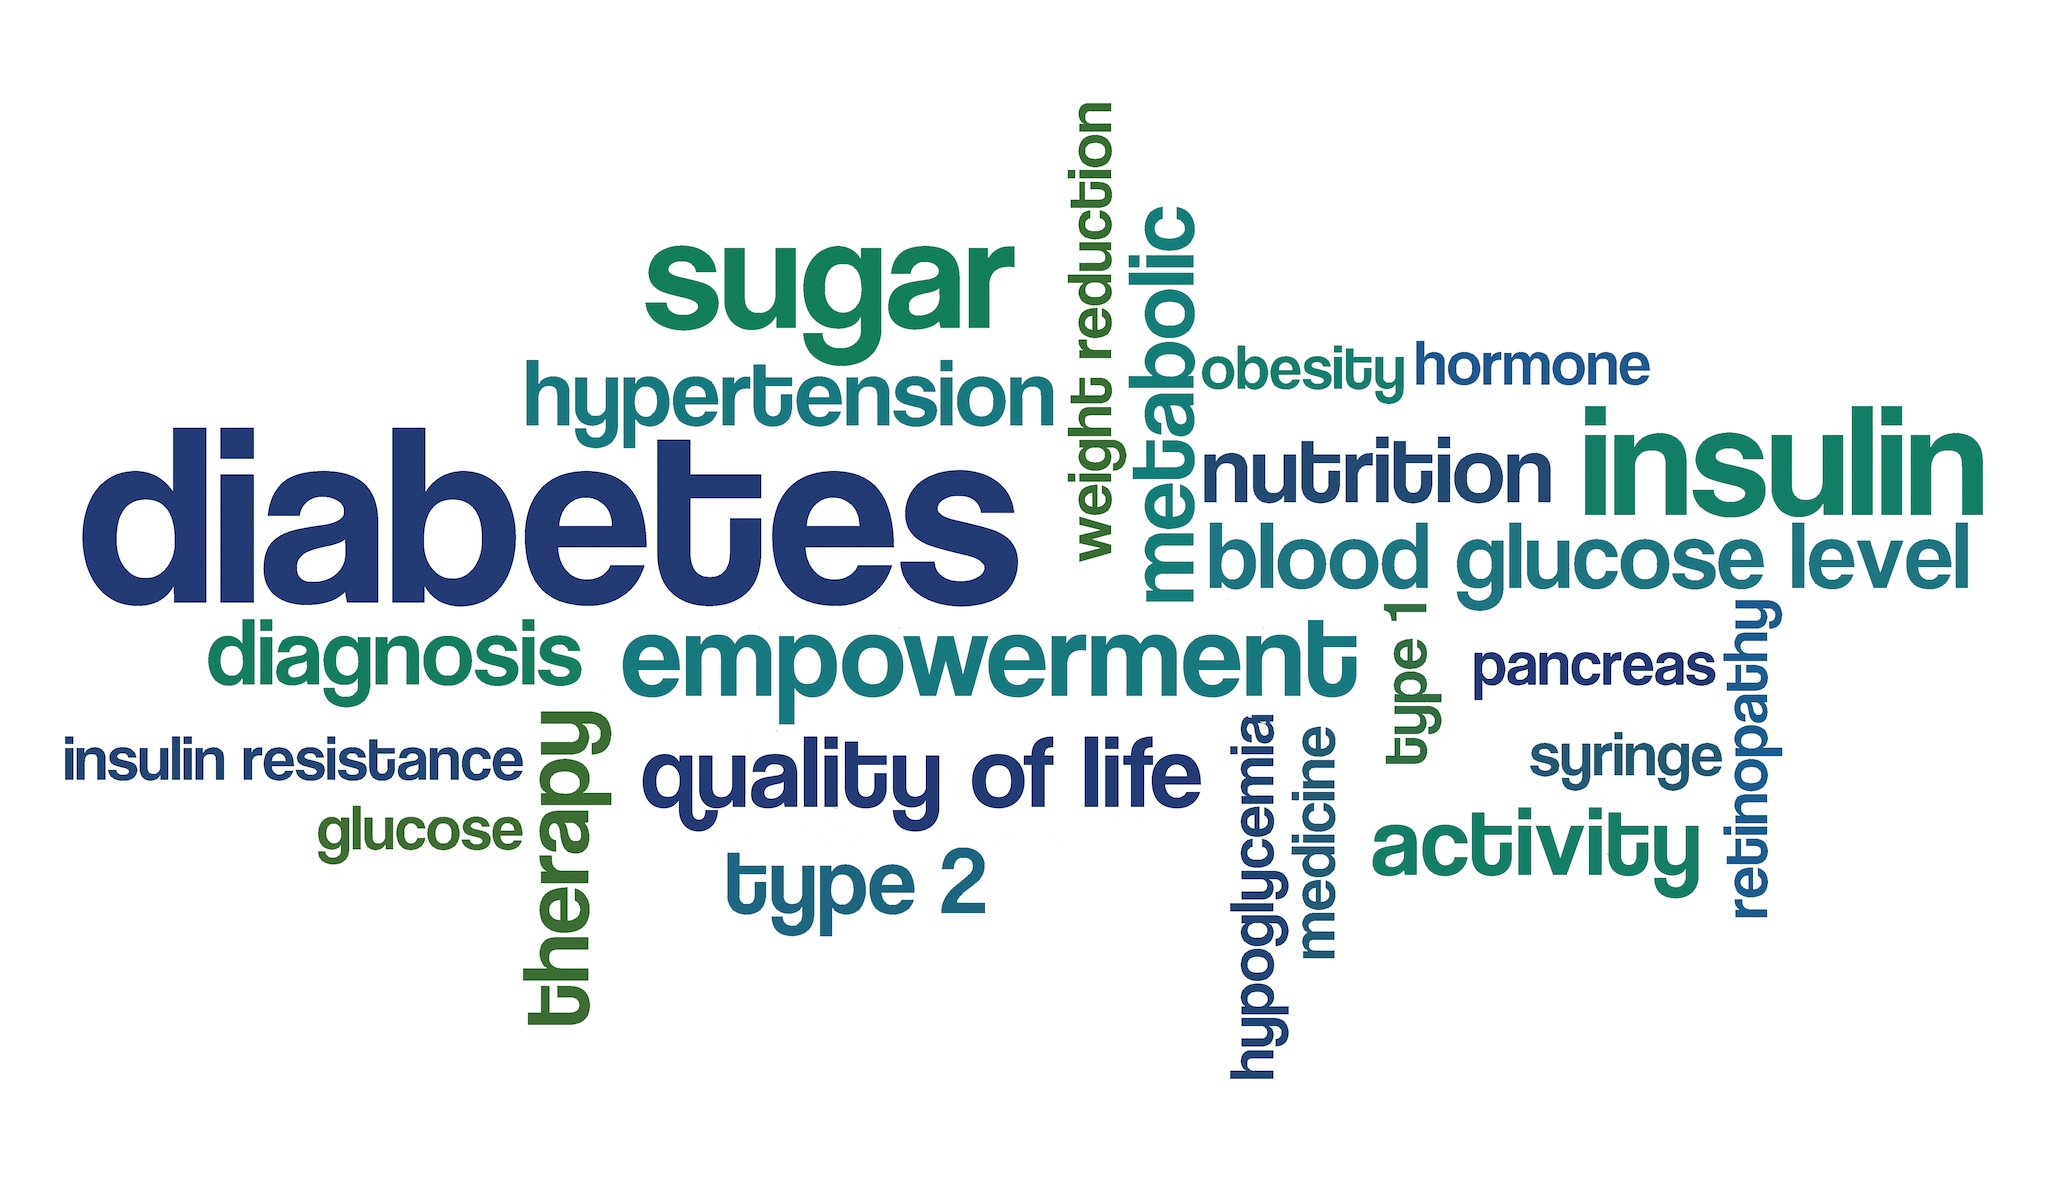 Diabetes word cloud that includes the words "sugar," "insulin," and "empowerment."